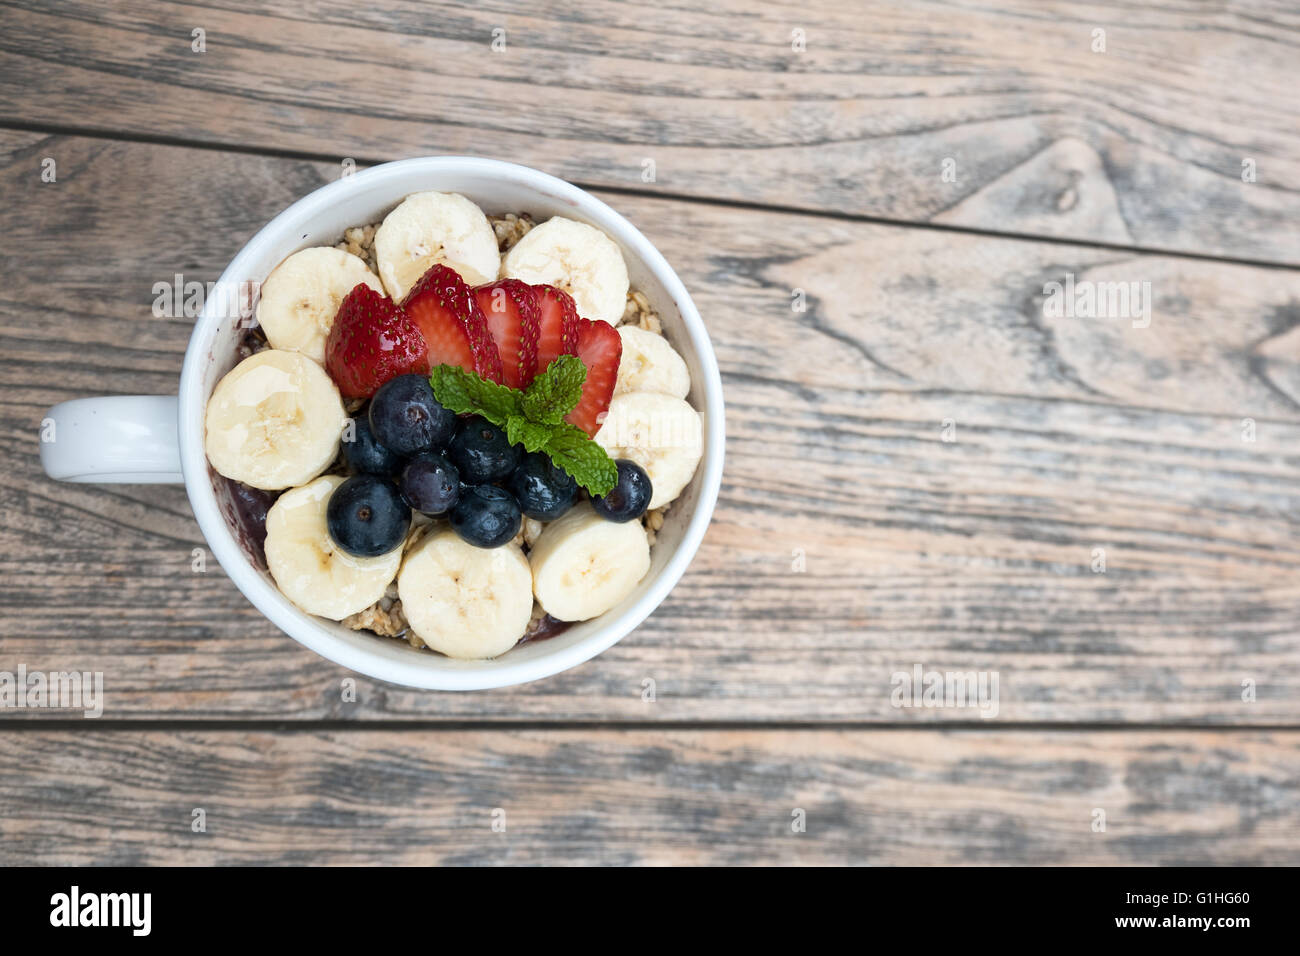 Acai bowl with fresh fruit strawberry, blueberry, banana and peppermint leaves on top on the wooden table. Stock Photo